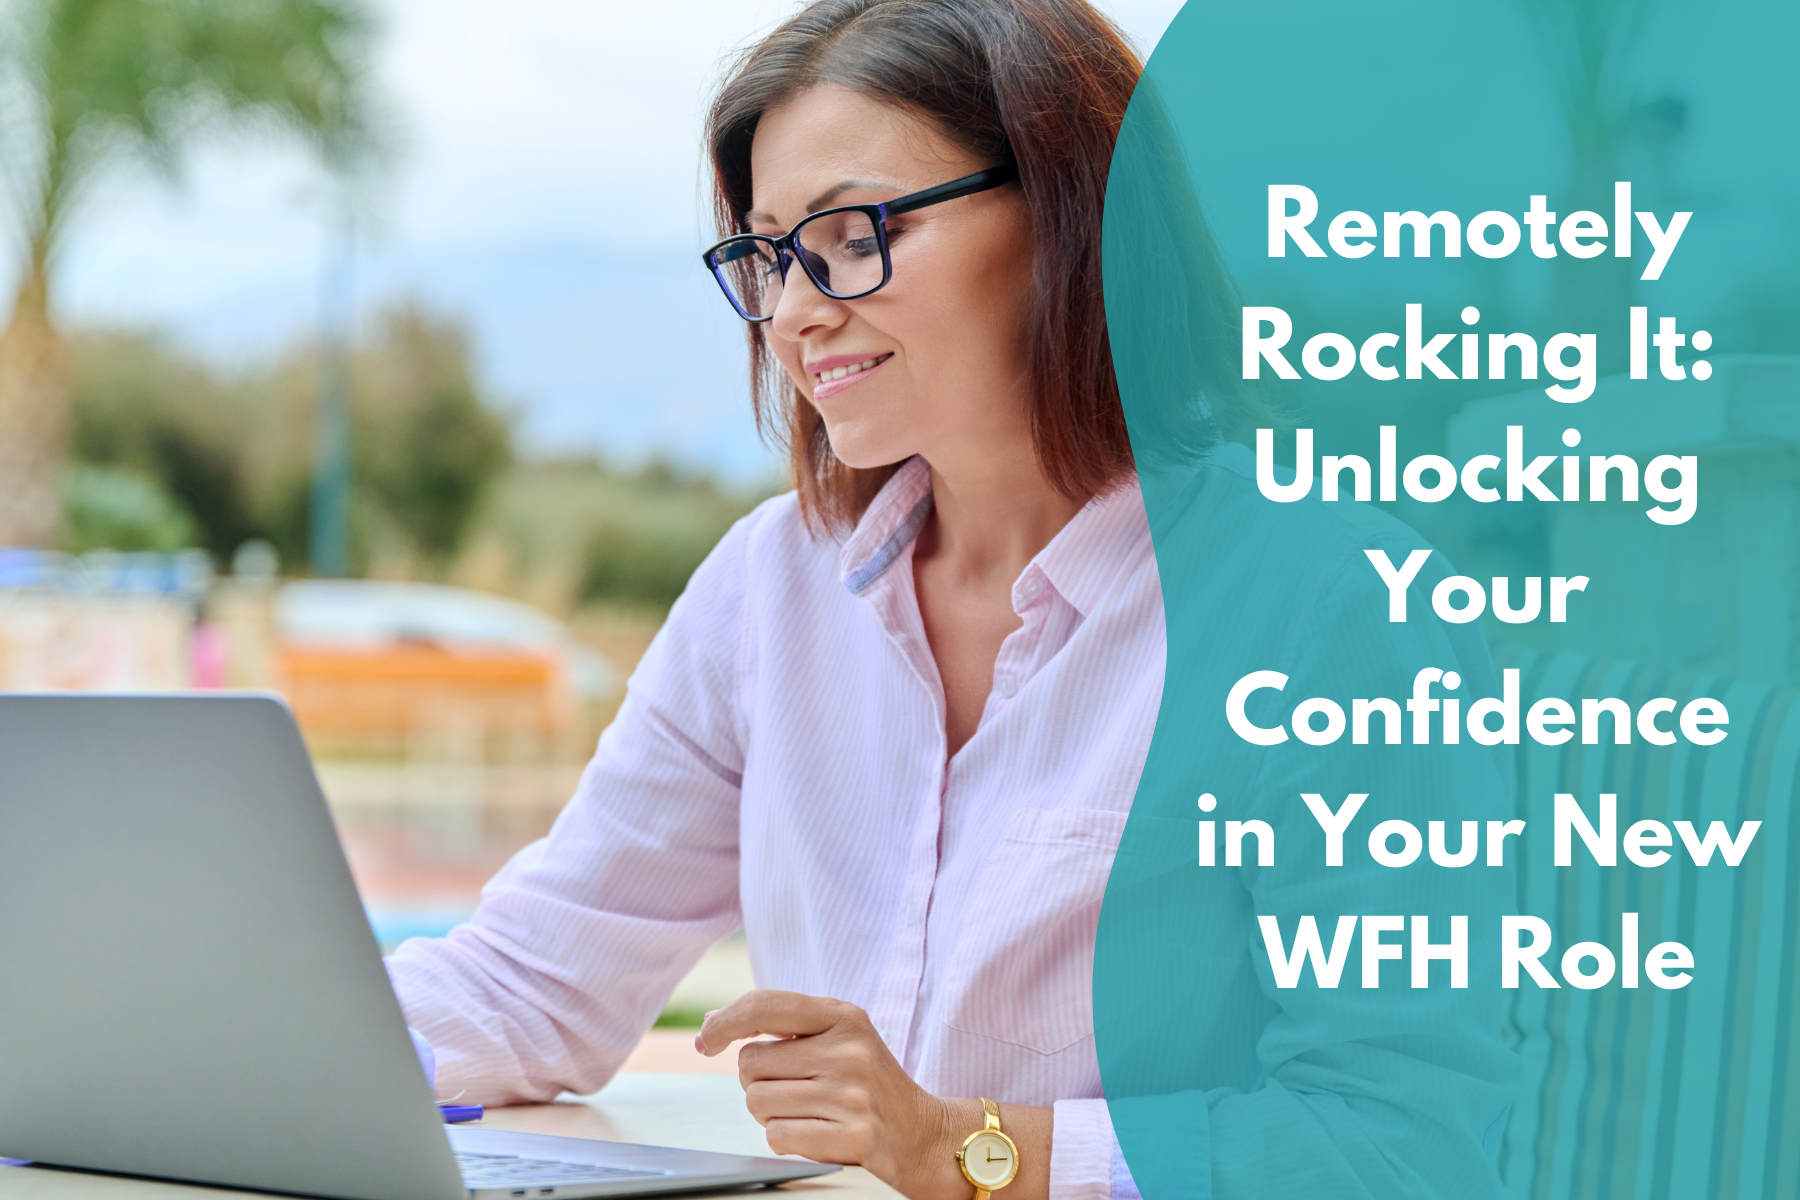 Remotely Rocking It: Unlocking Your Confidence in Your New WFH Role